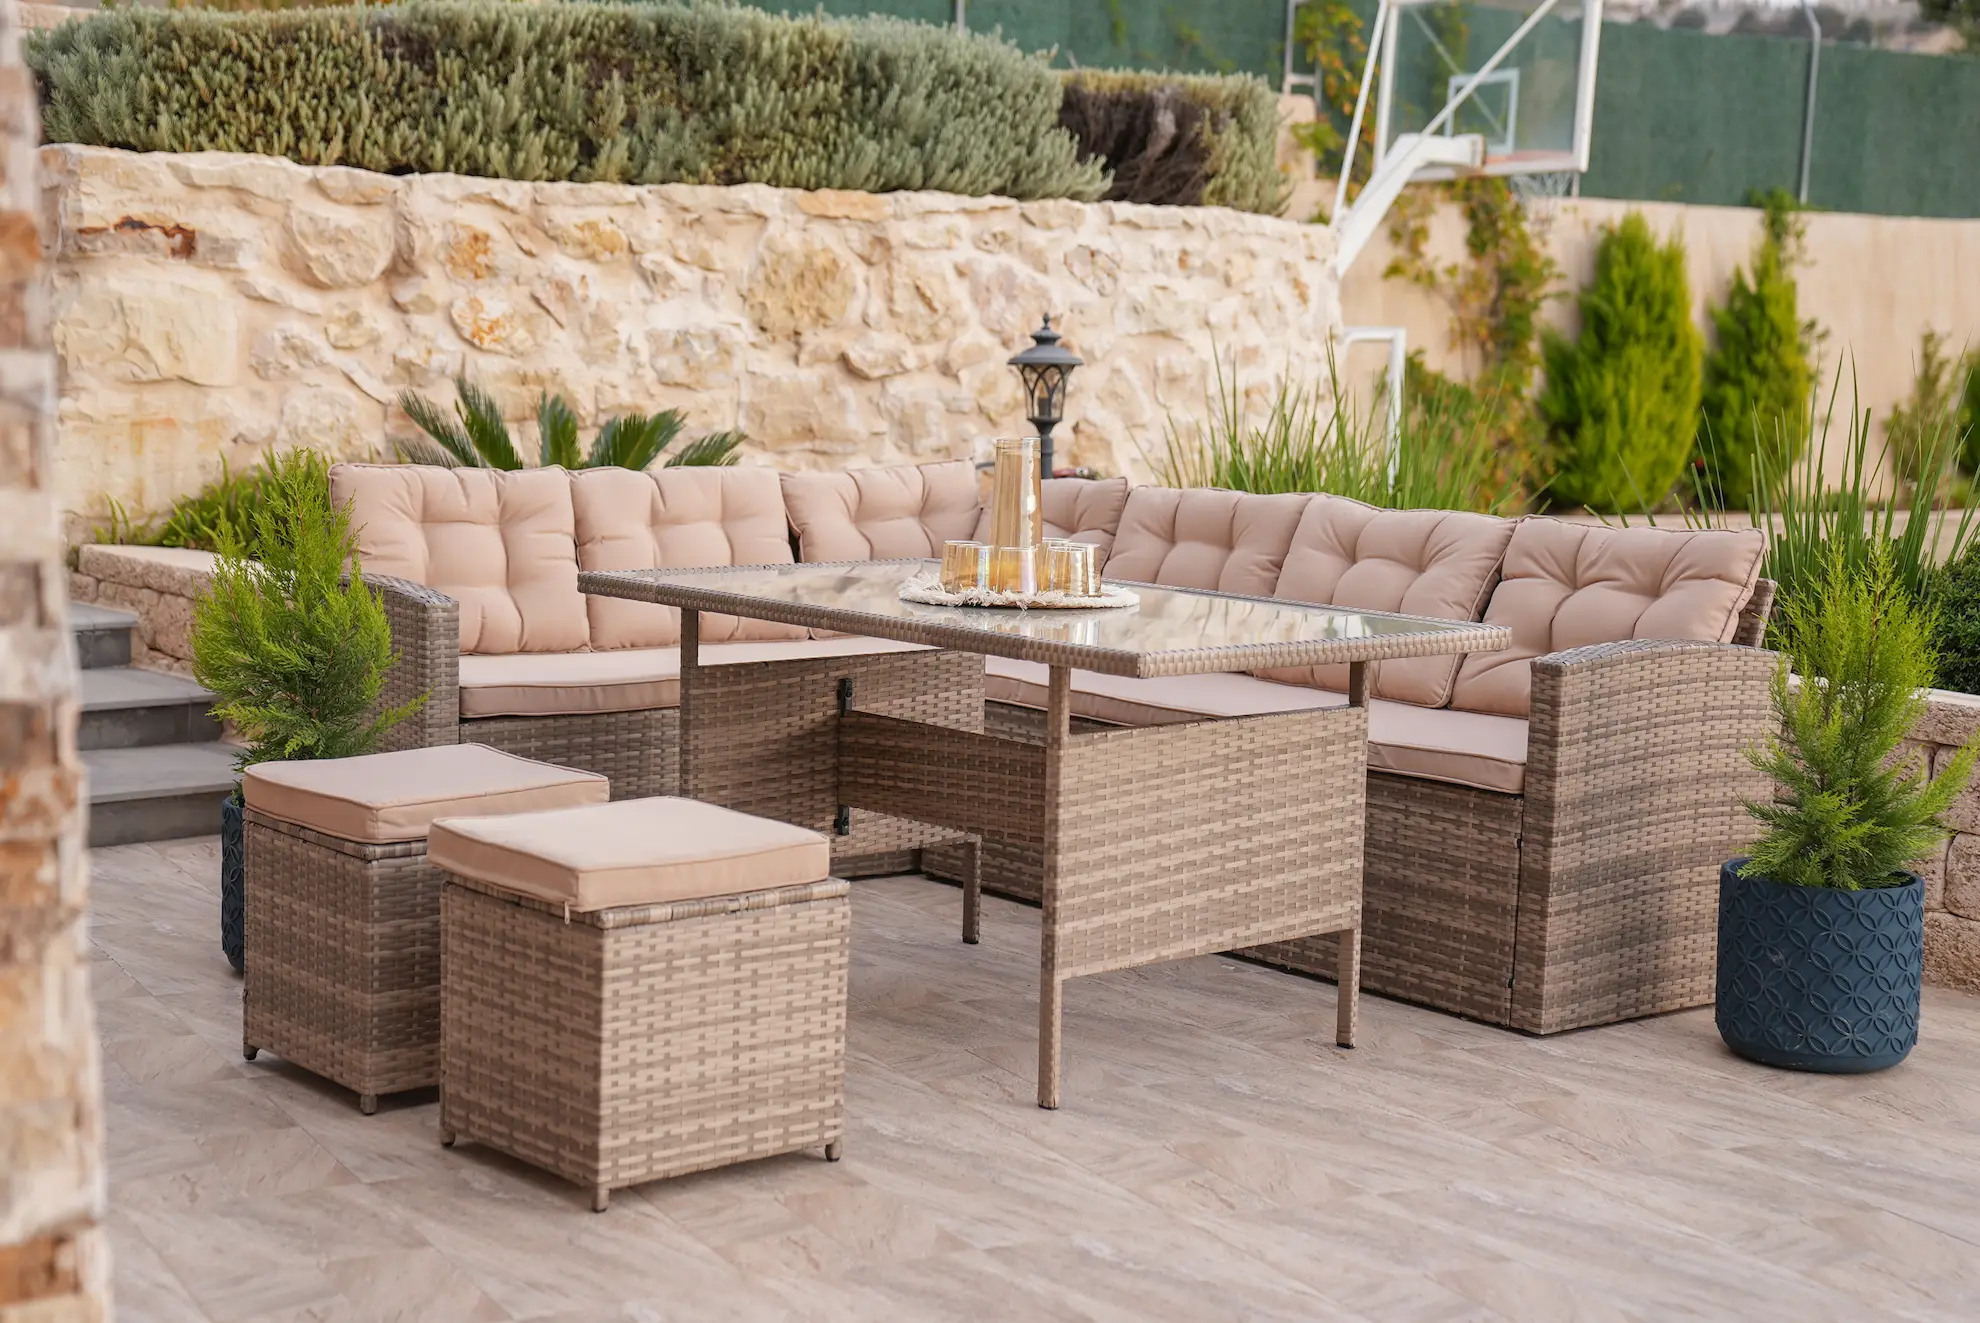 Outdoor Sofas for your algarve home are sold at Oliveira